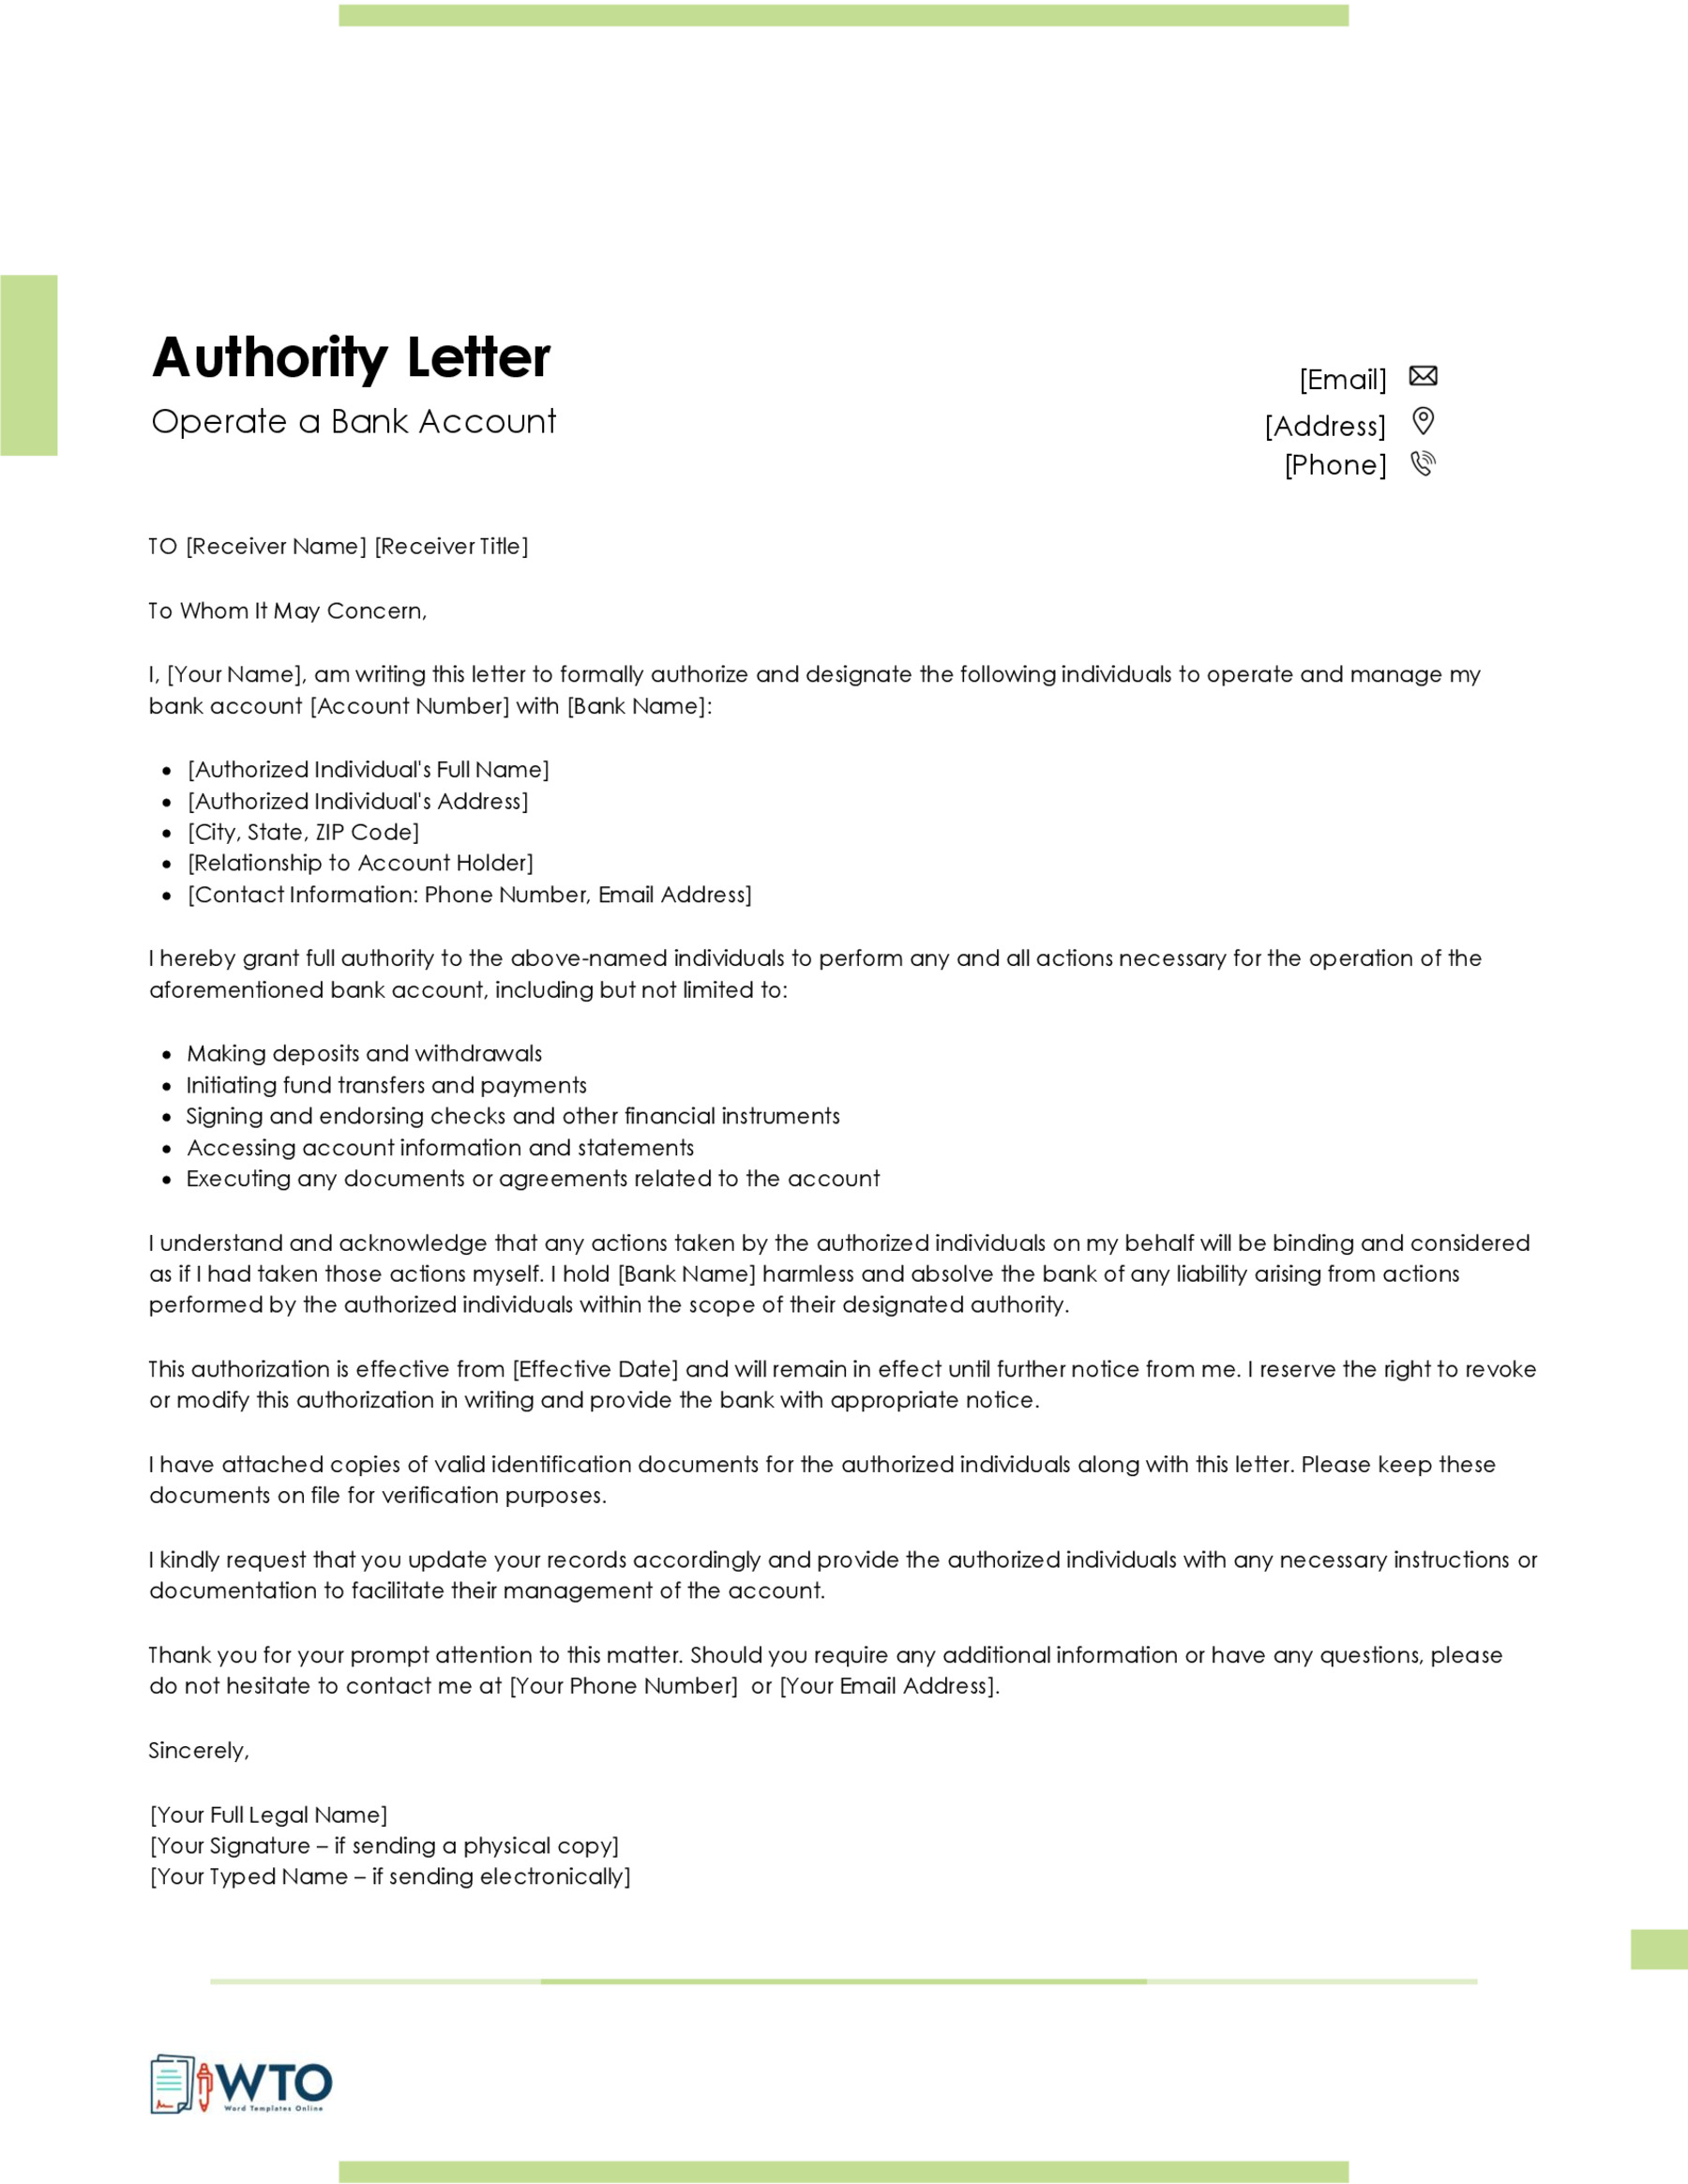 Authorization Letter to Operate a Bank Account Template-Free Word Format